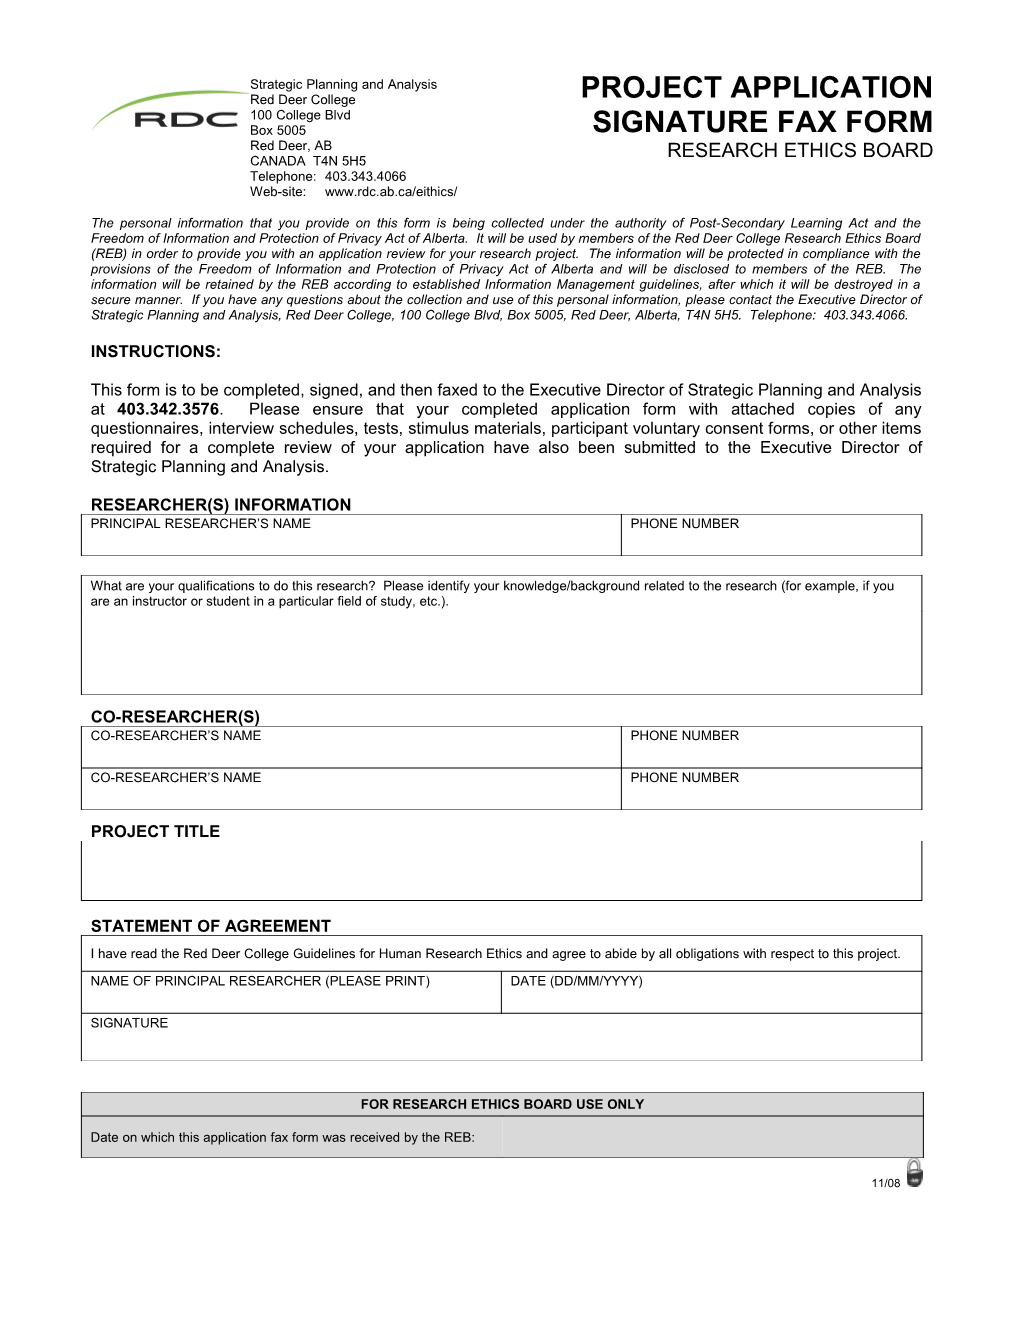 Project Application Signature Fax Form - Research Ethics Board